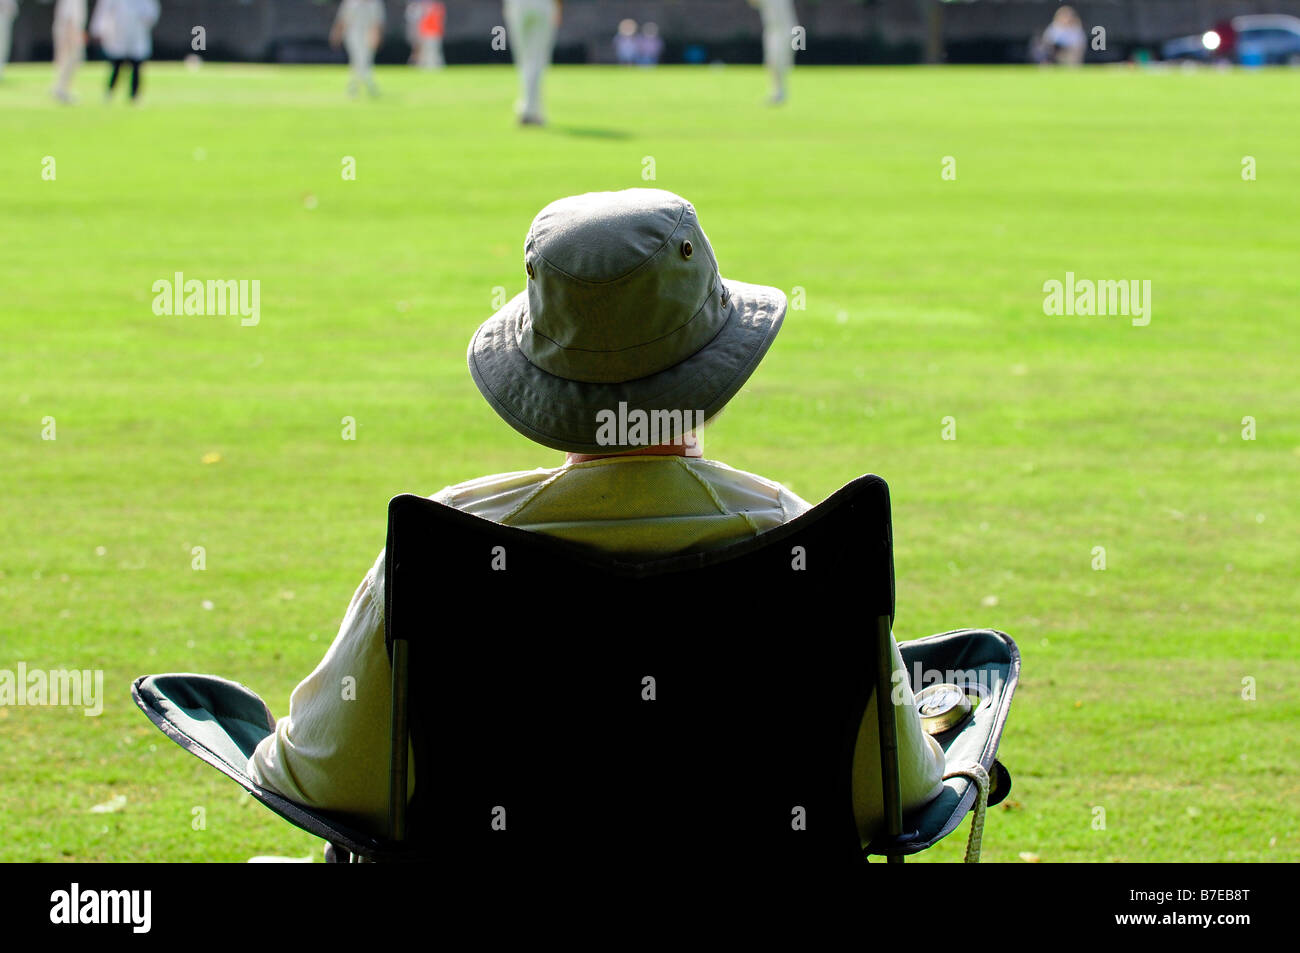 outdoor image of cricket supporter Stock Photo